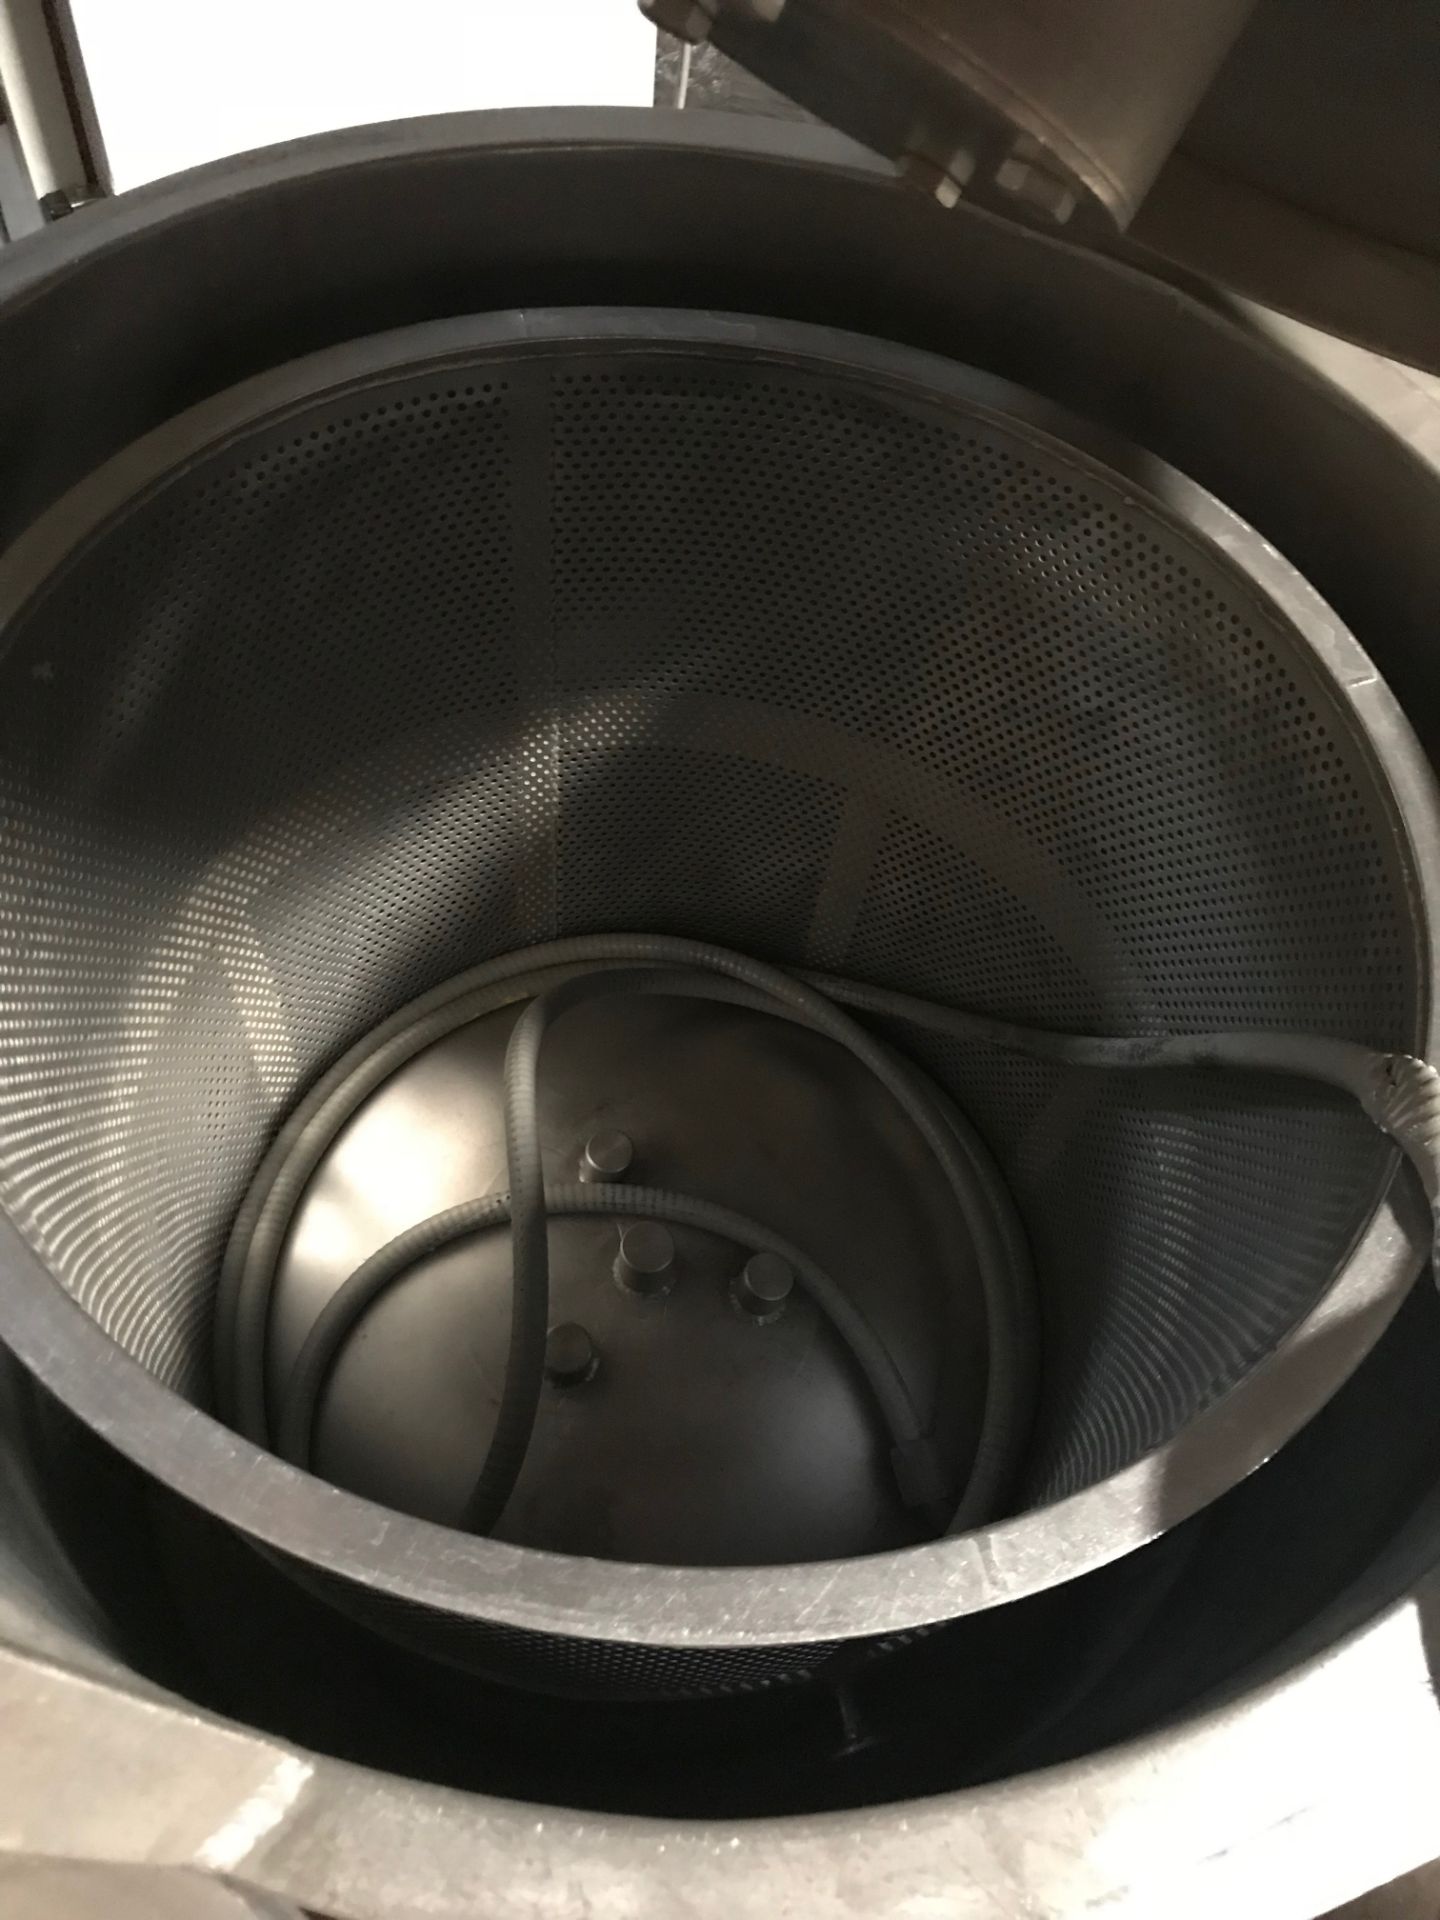 Stainless Steel Kettle, 3 ft Diameter, 31 inch tall - Image 2 of 4